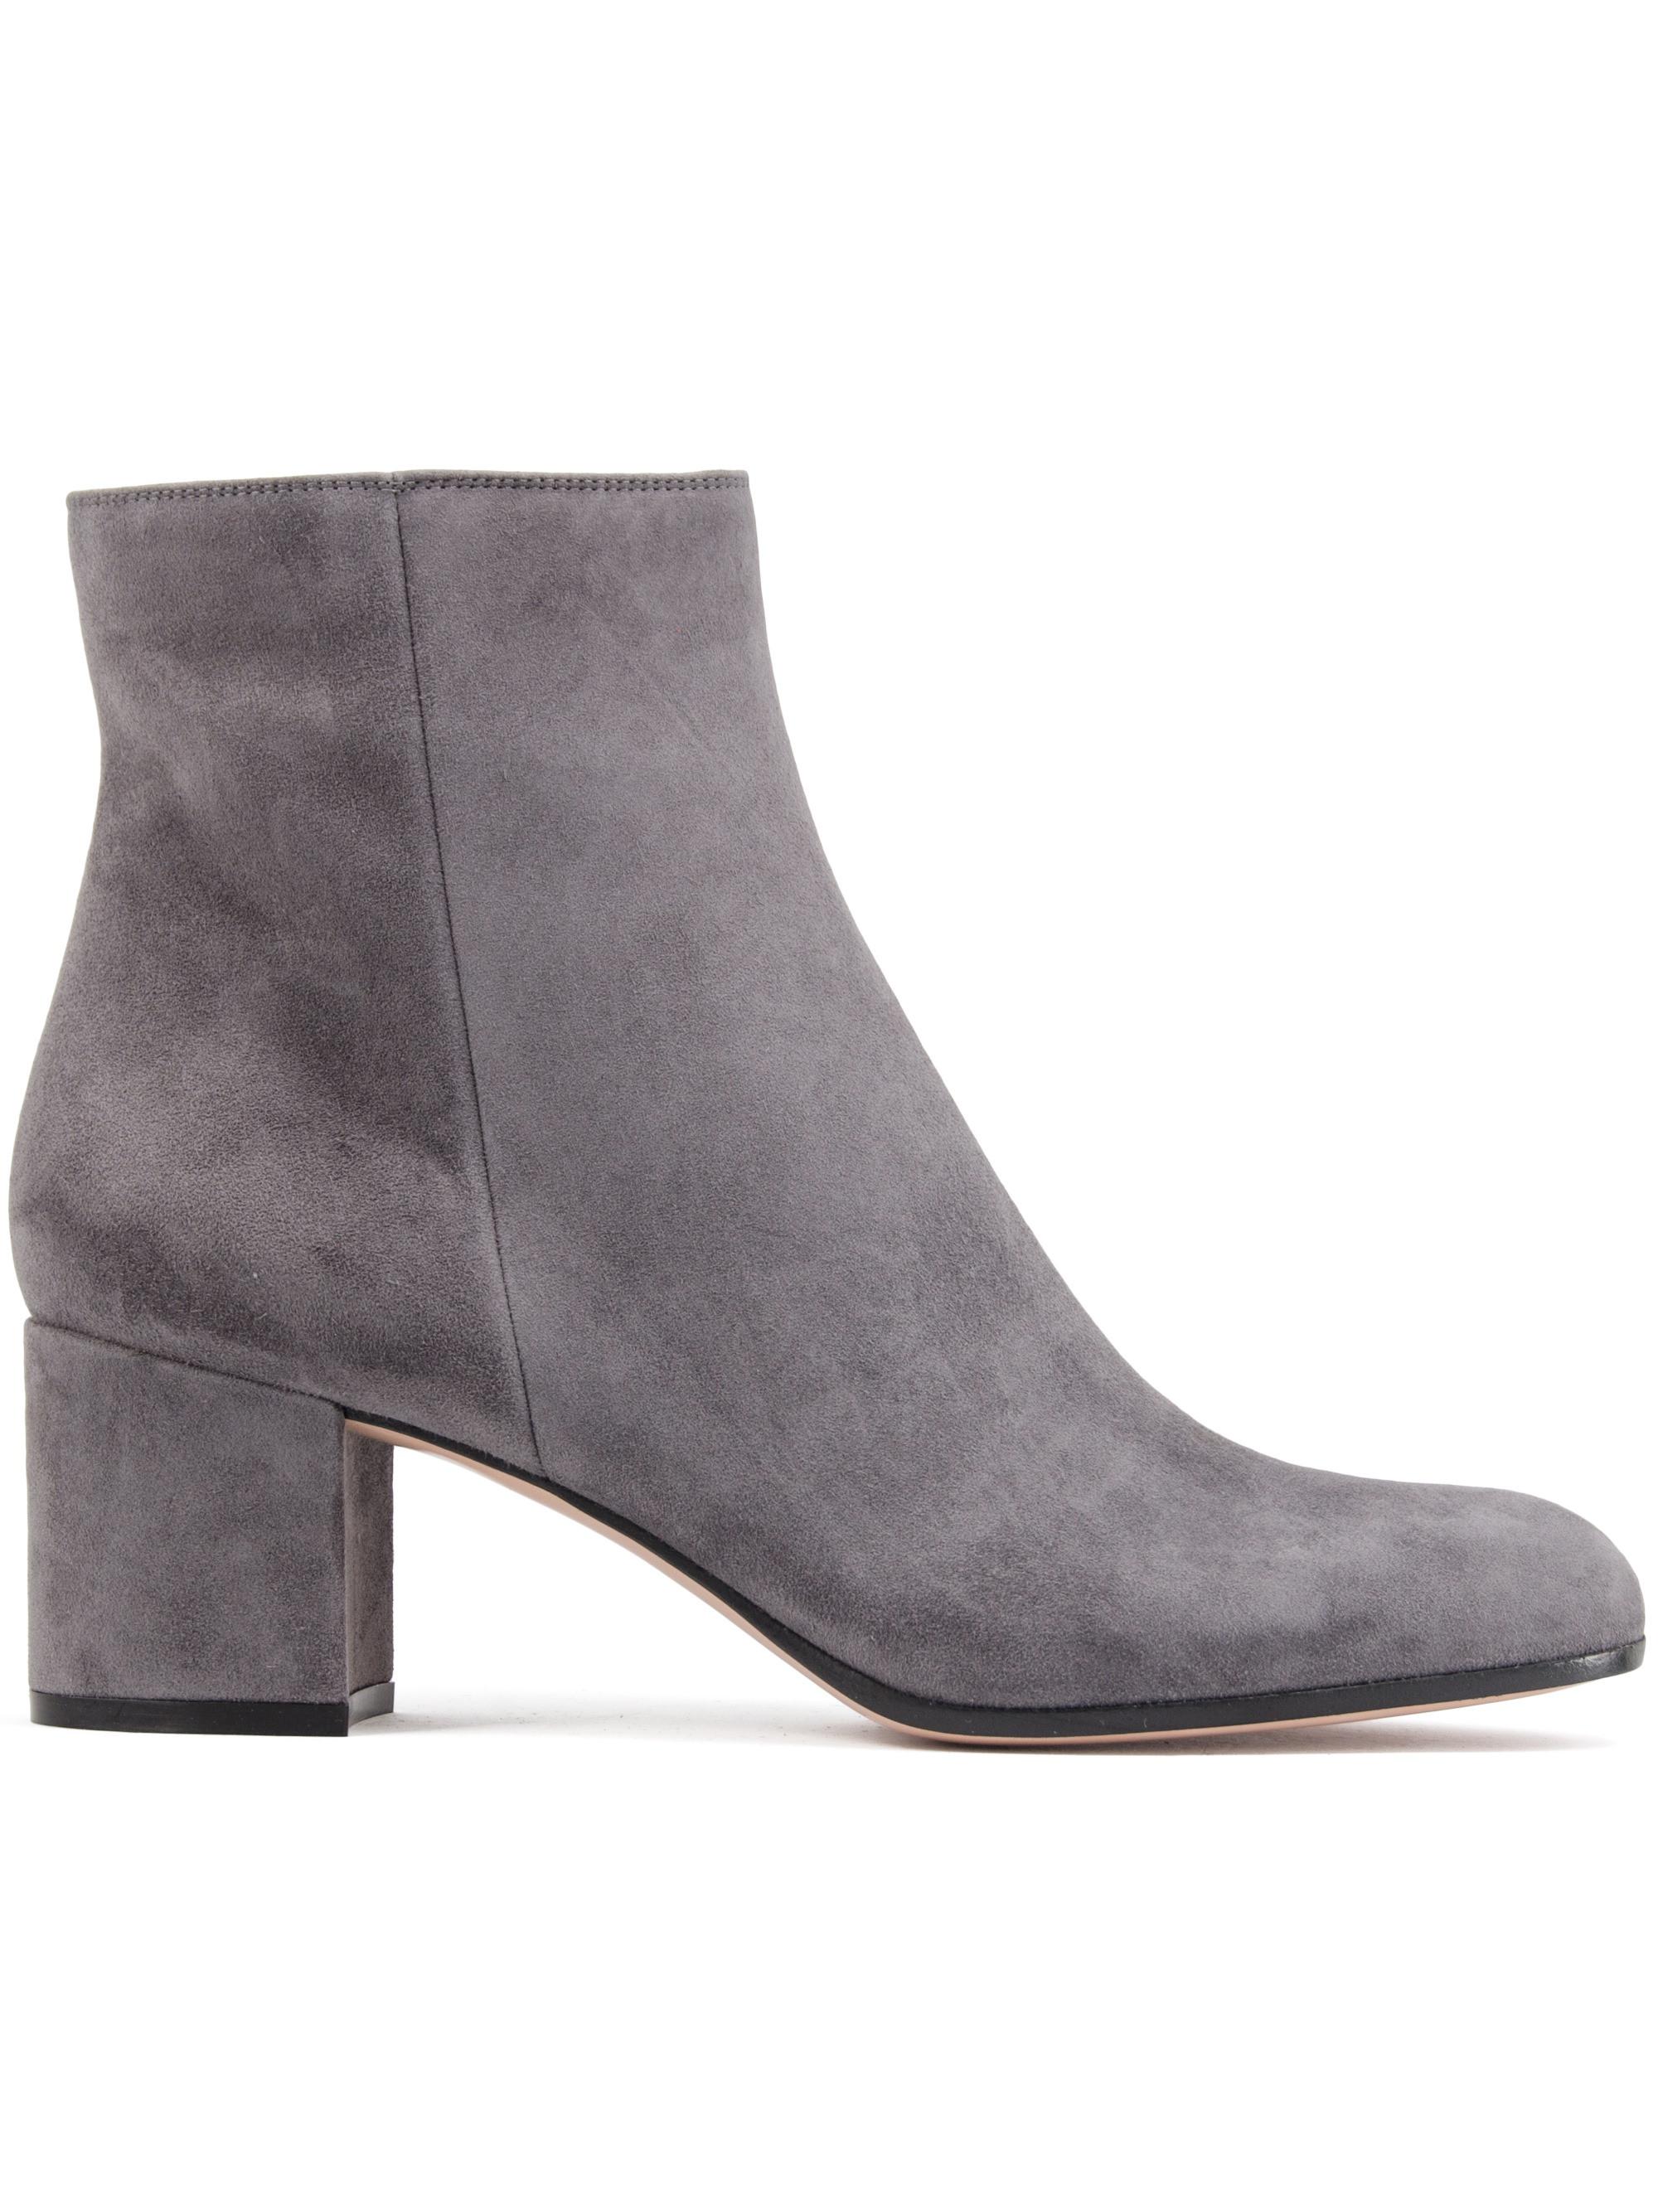 Gianvito Rossi Margaux Suede Ankle Boots in Grey - Lyst